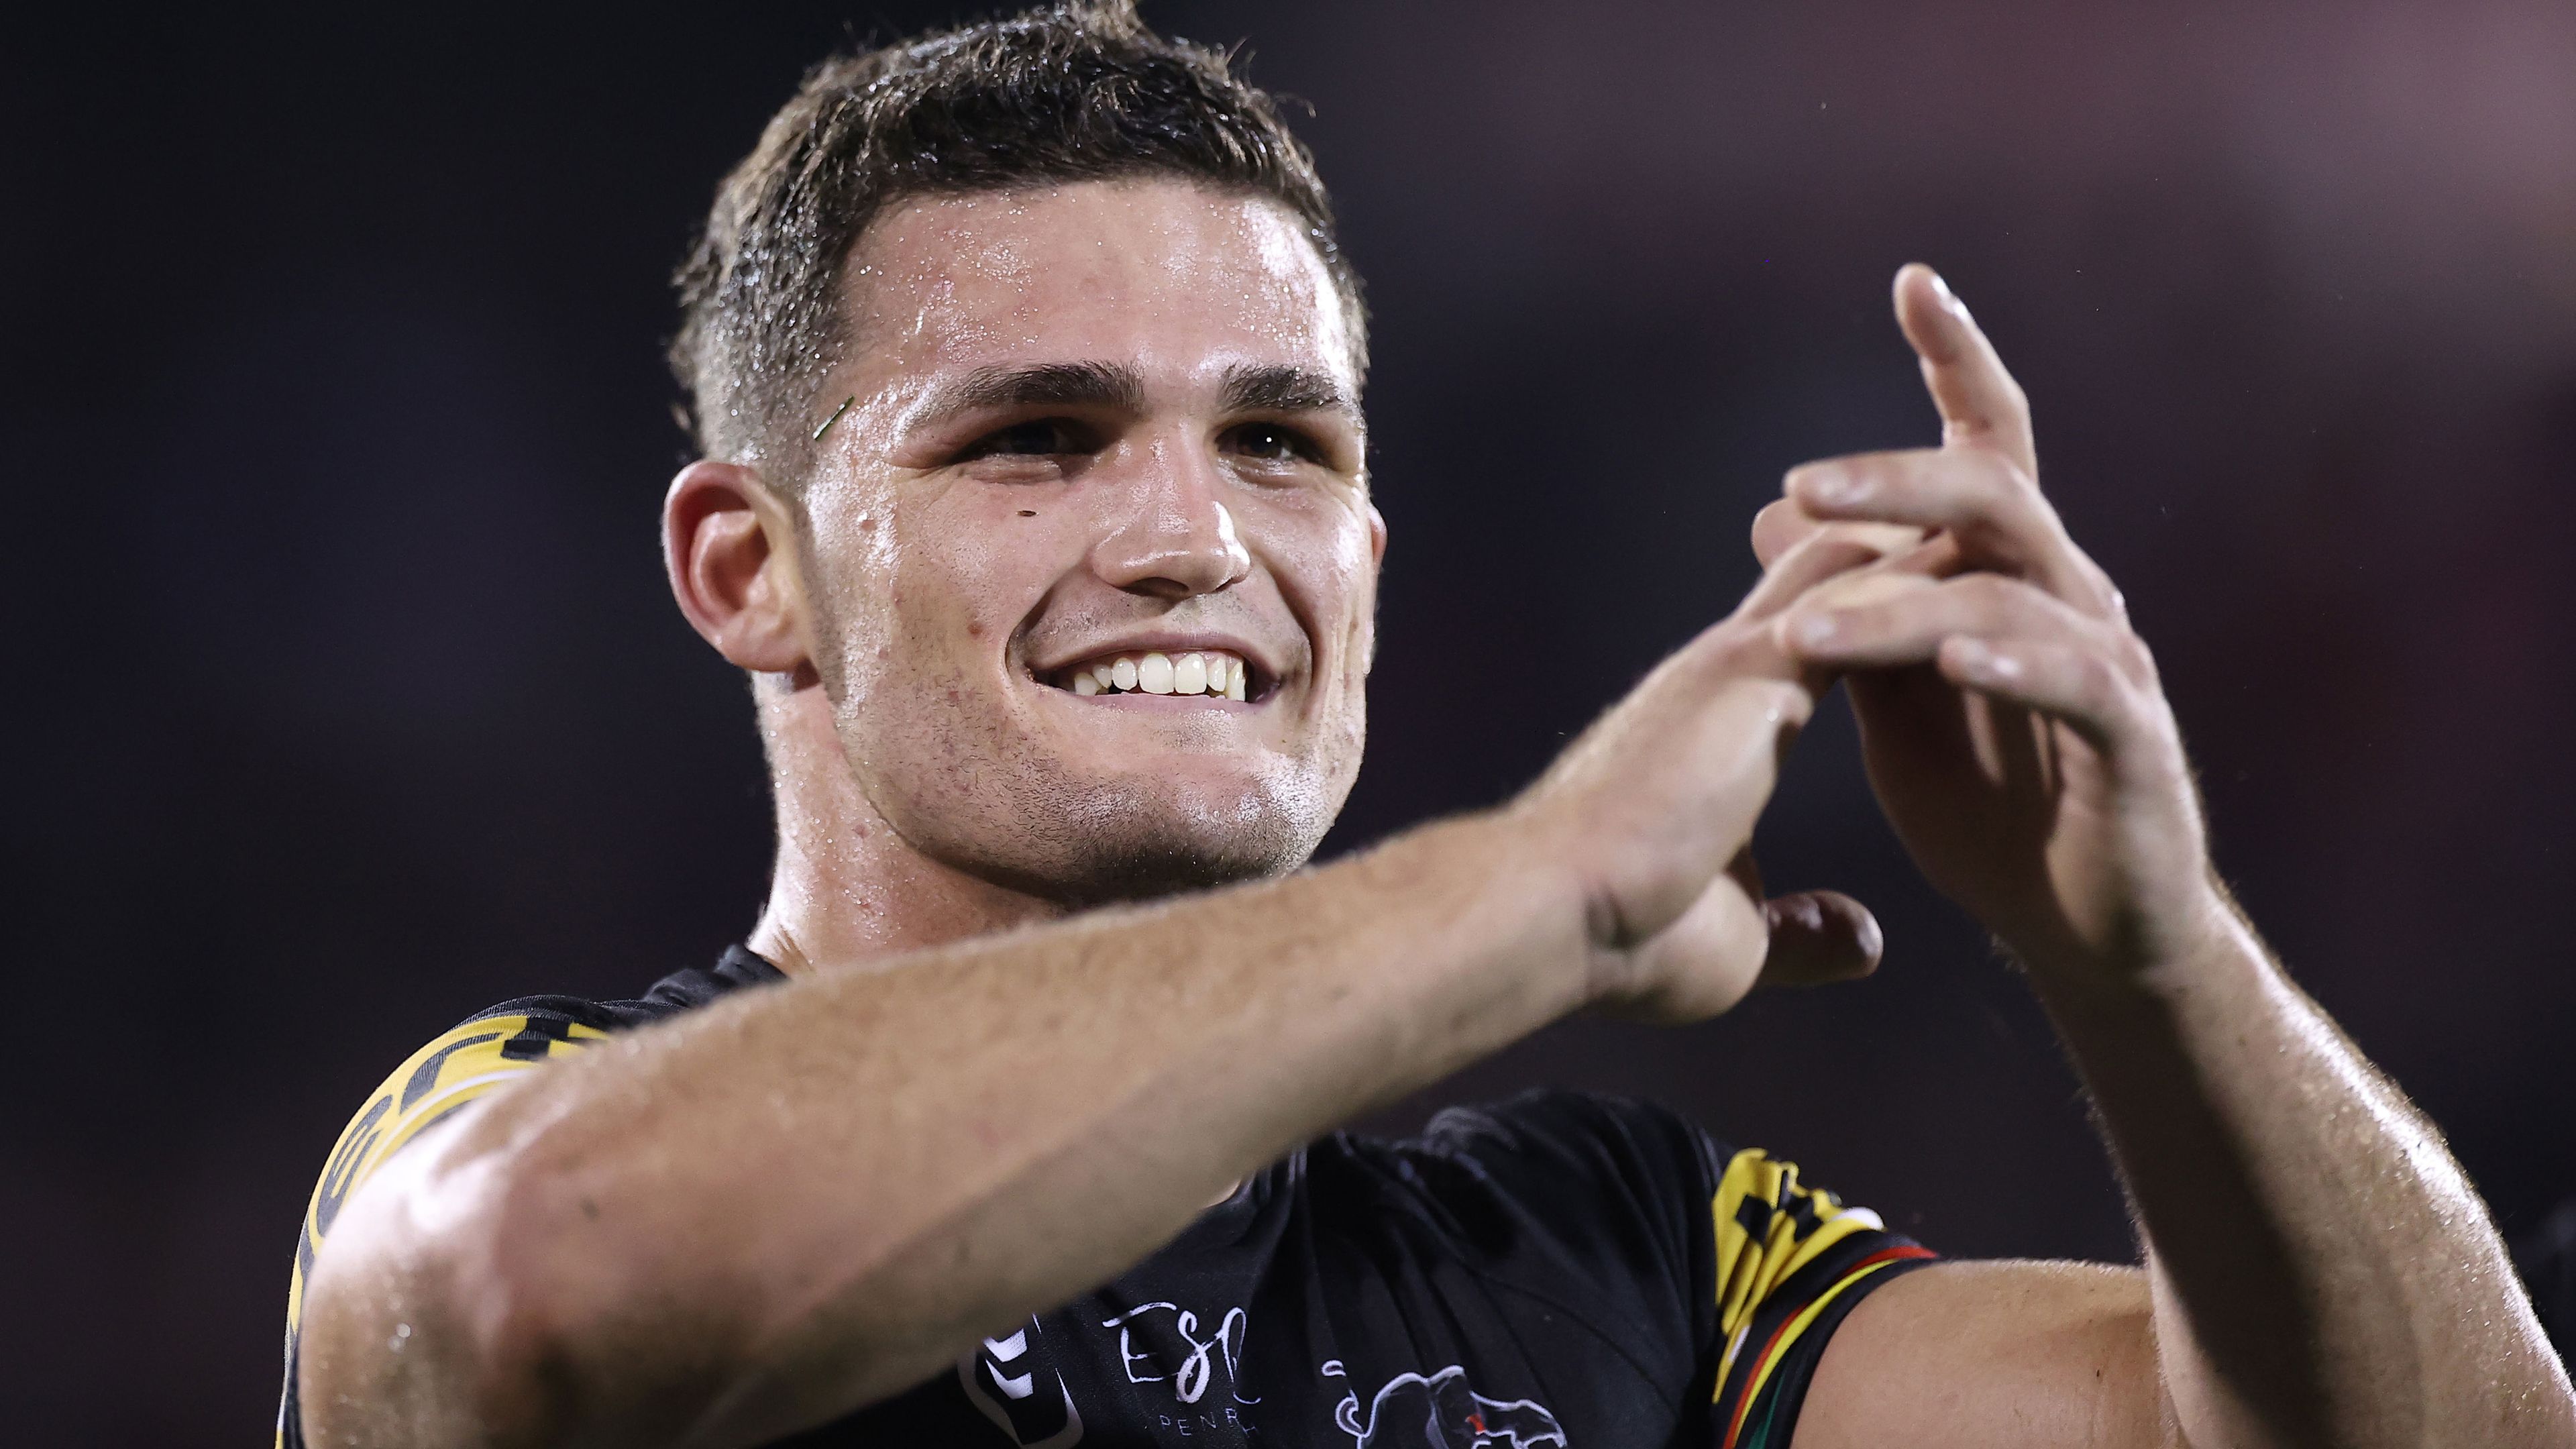 EXCLUSIVE: Andrew Johns says Nathan Cleary's taken his game to a 'frightening' new level